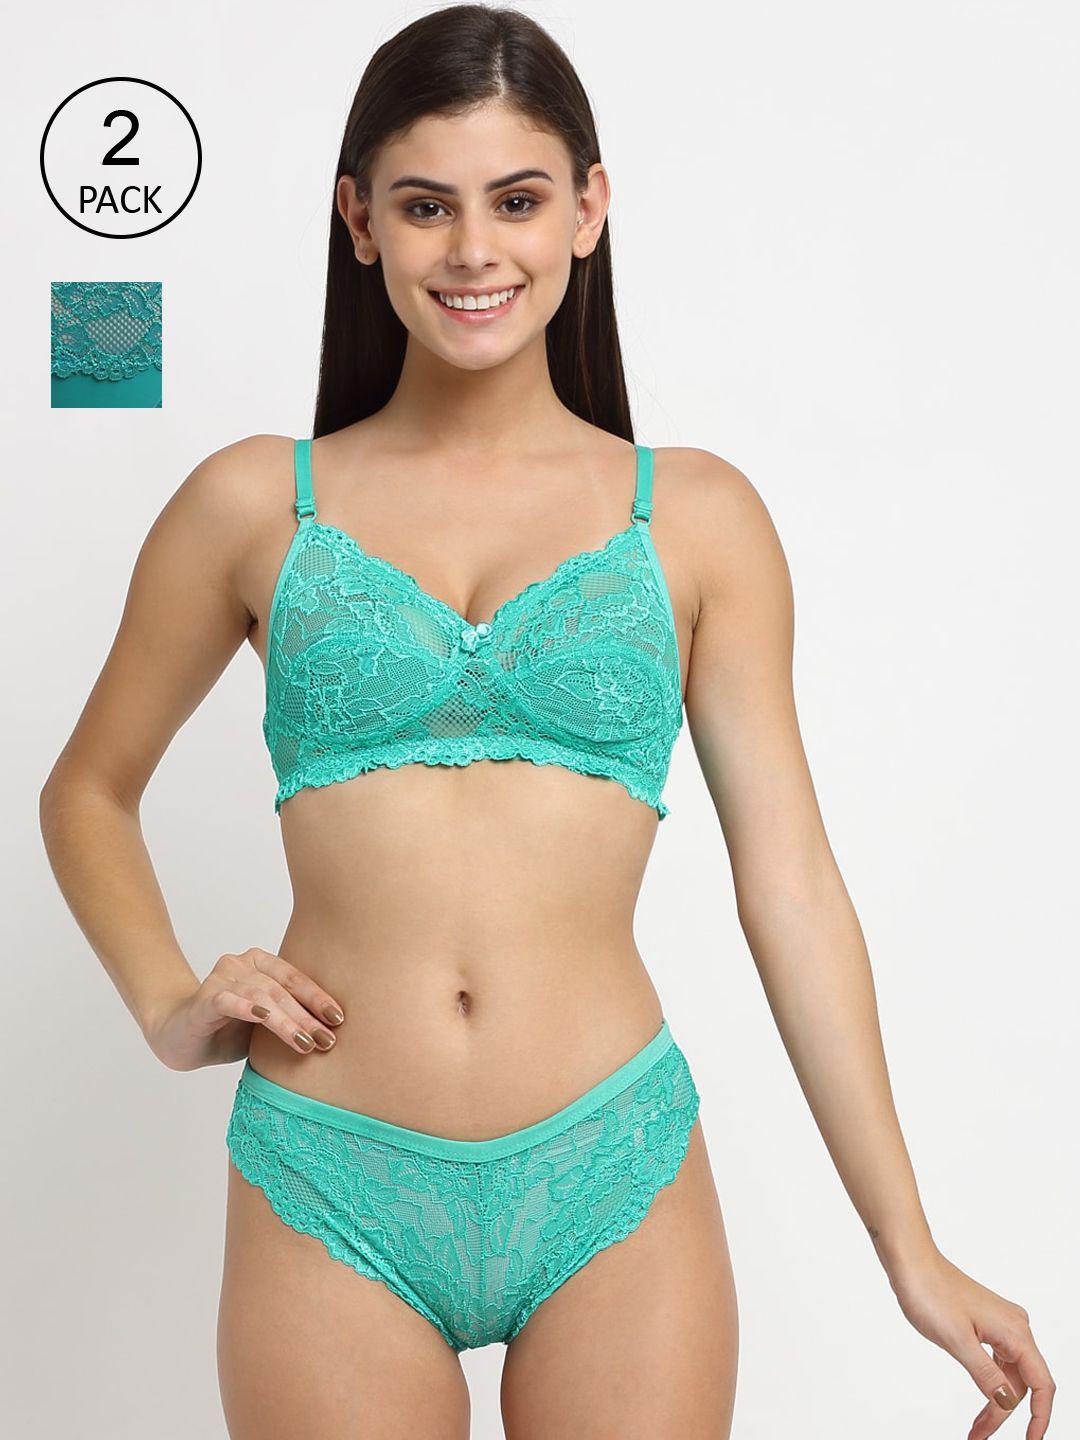 friskers pack of 2 blue & green non padded lingerie sets